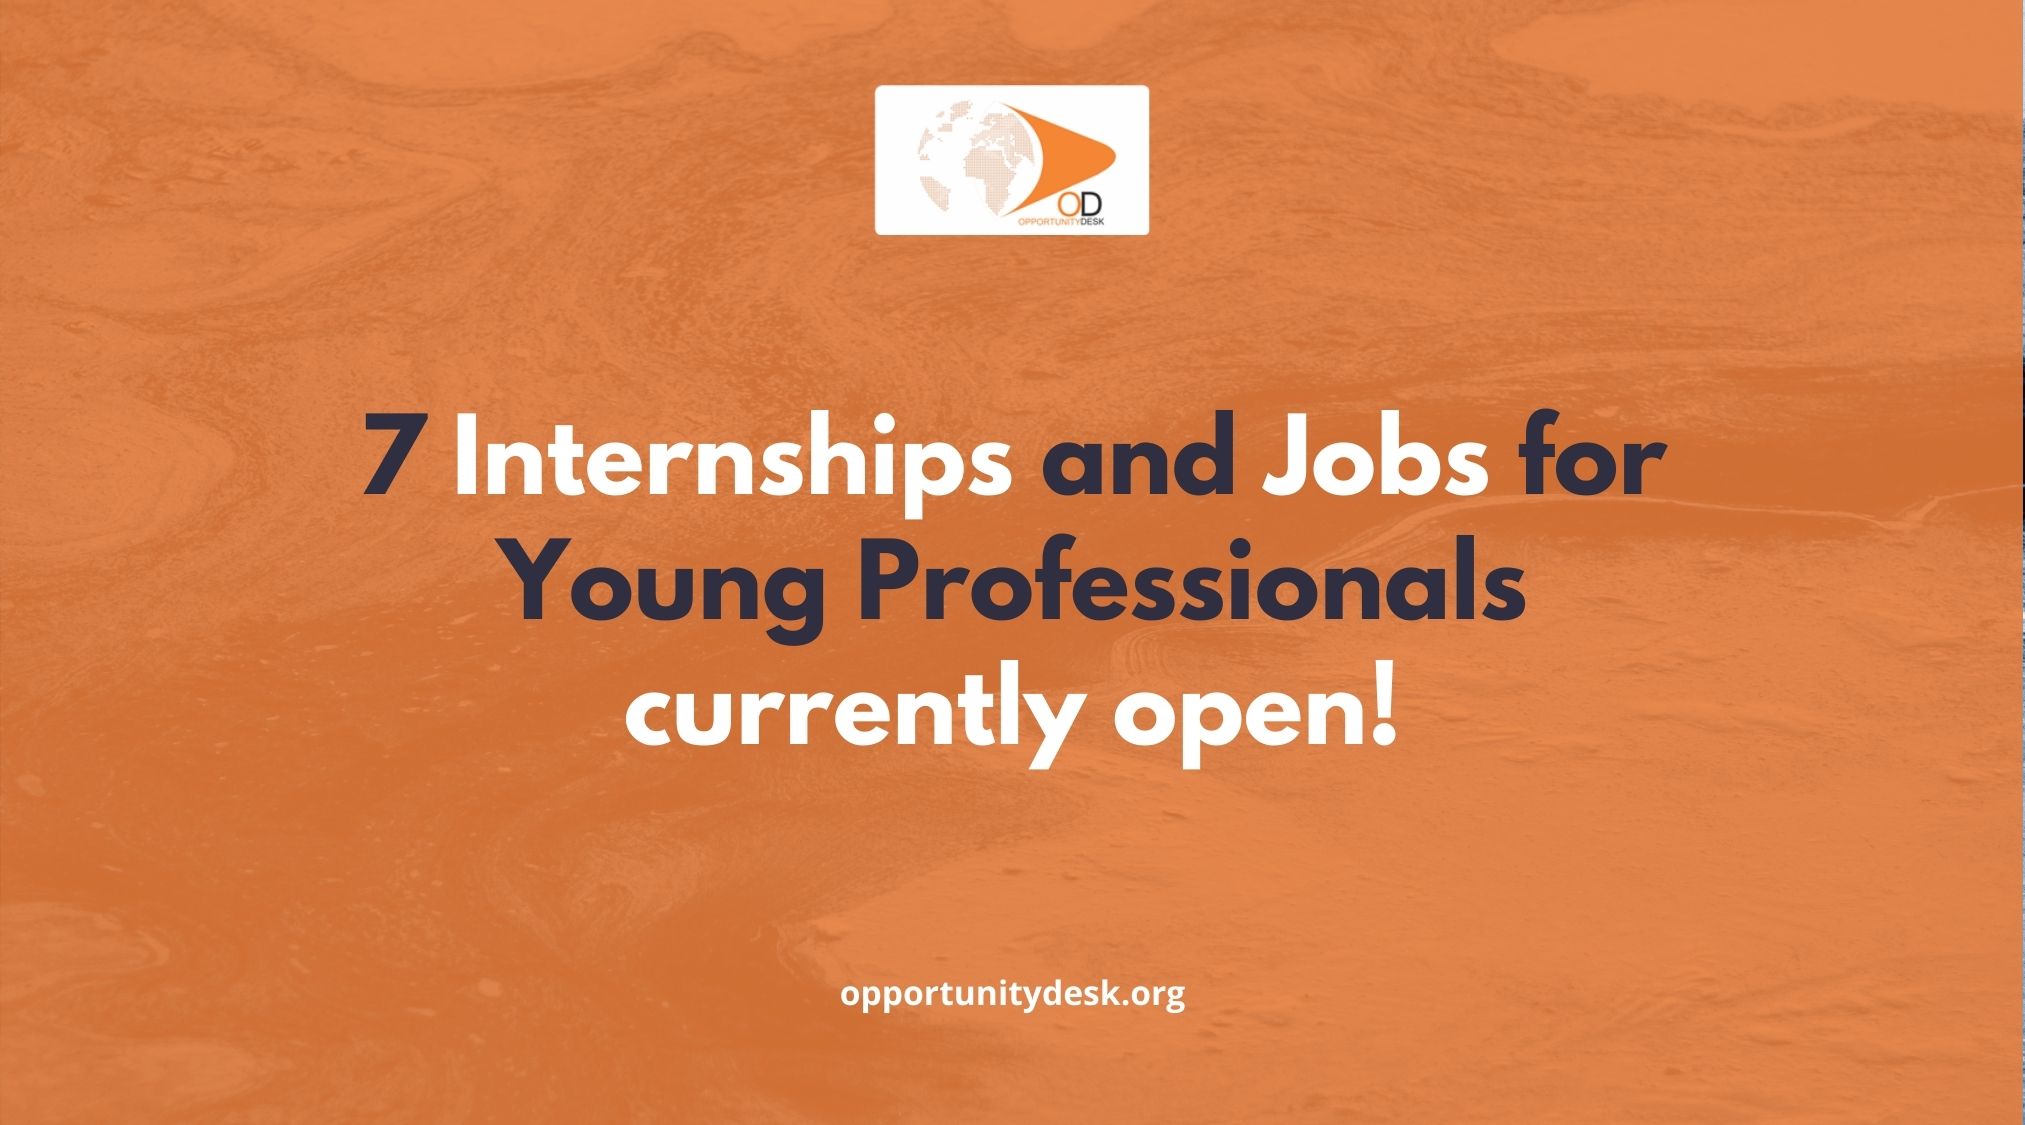 7 Internships and Jobs for Young Professionals – March 2021